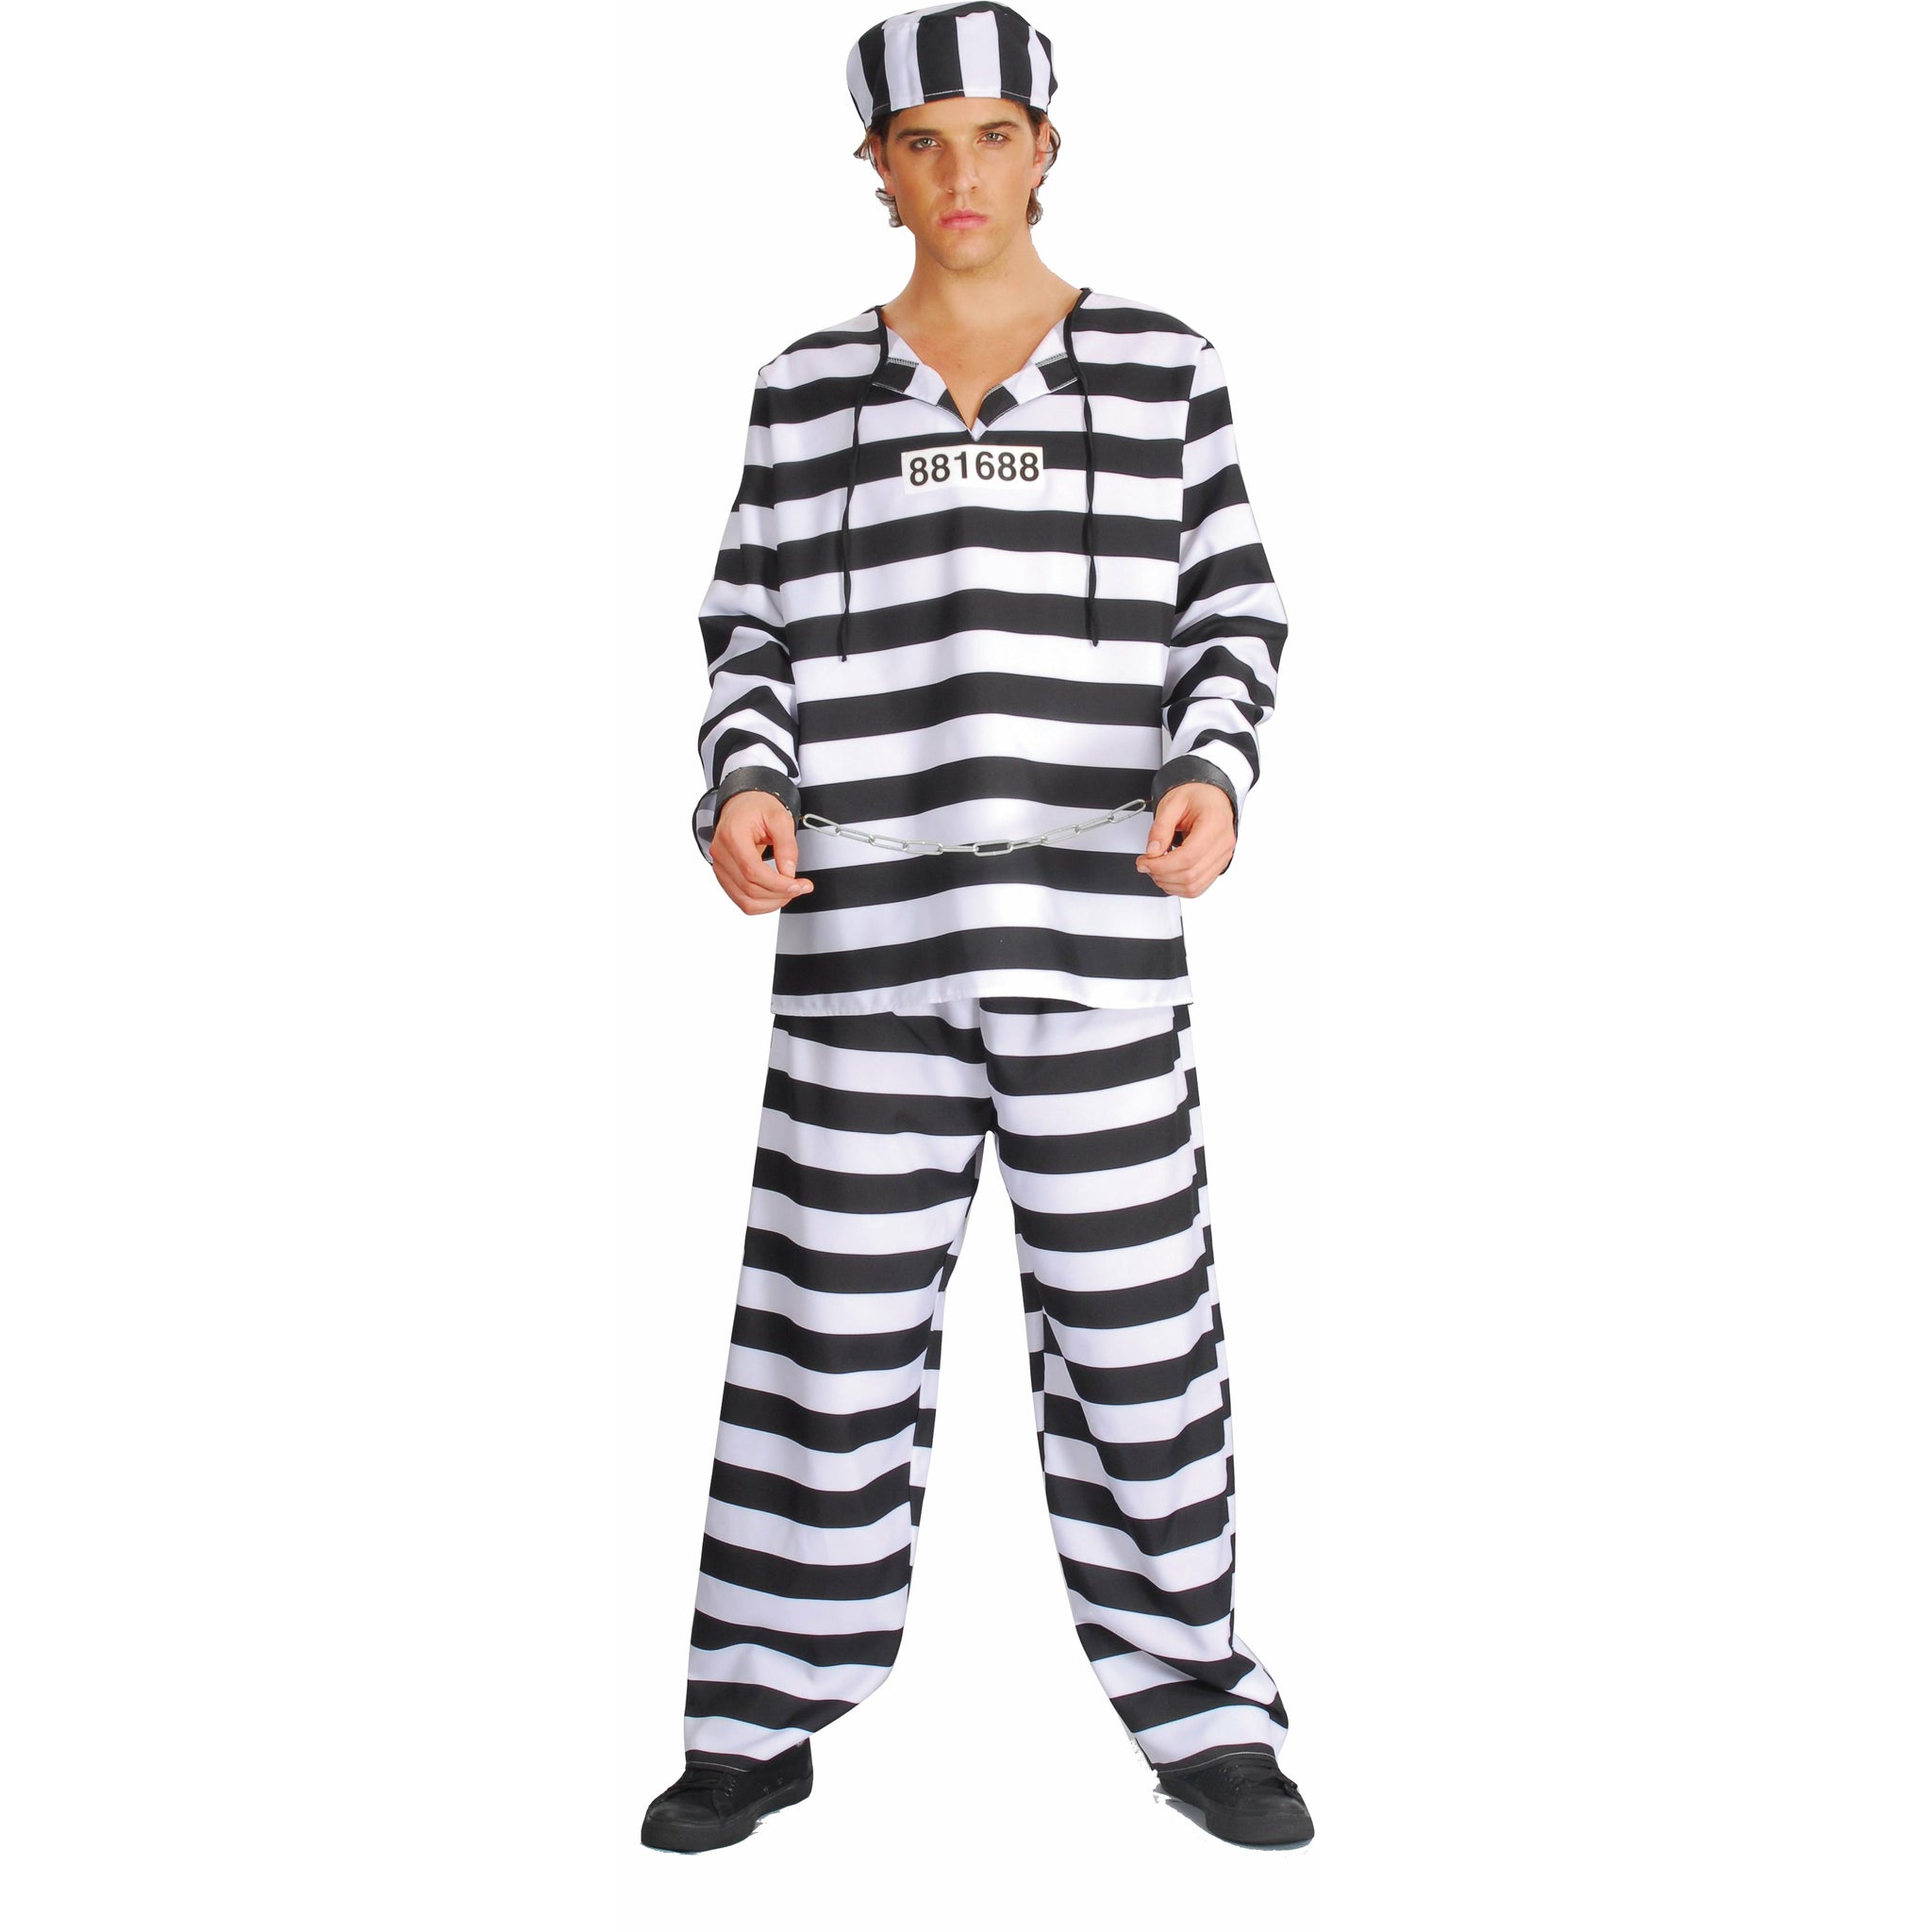 Ciao - Adult Costume - Inmate (62019)